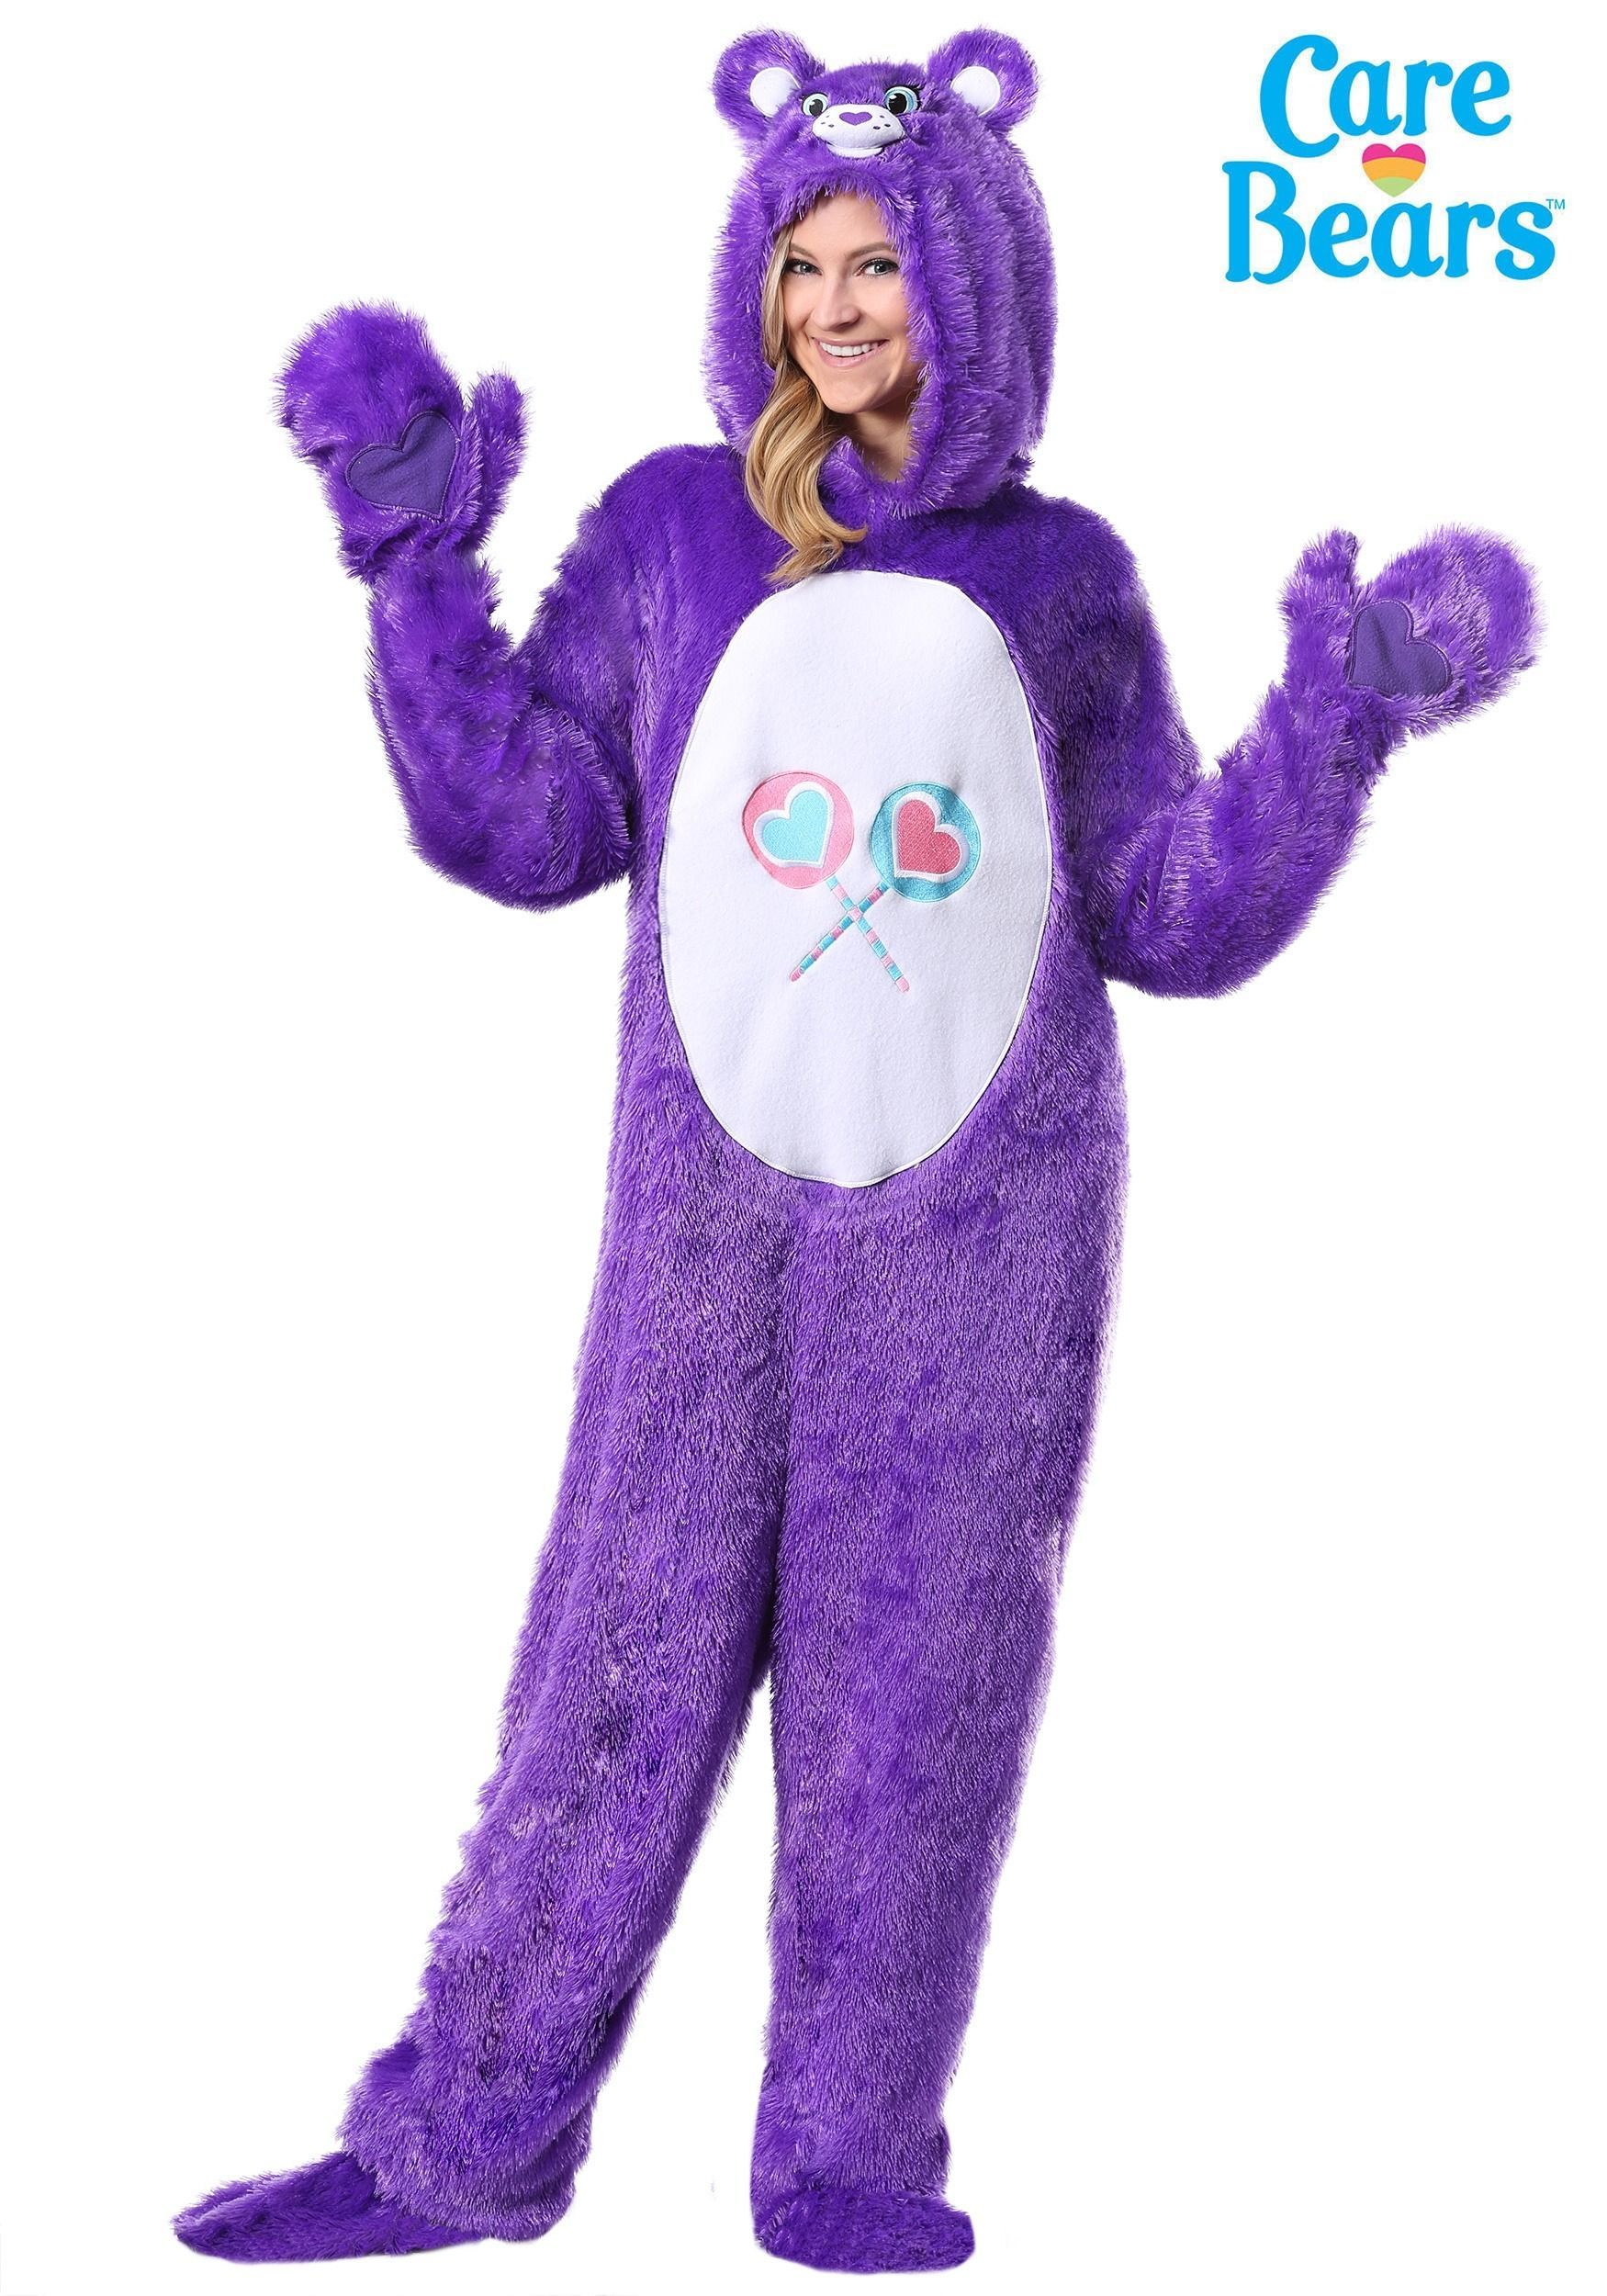 Cyclone reccomend Adult and care bear and costume